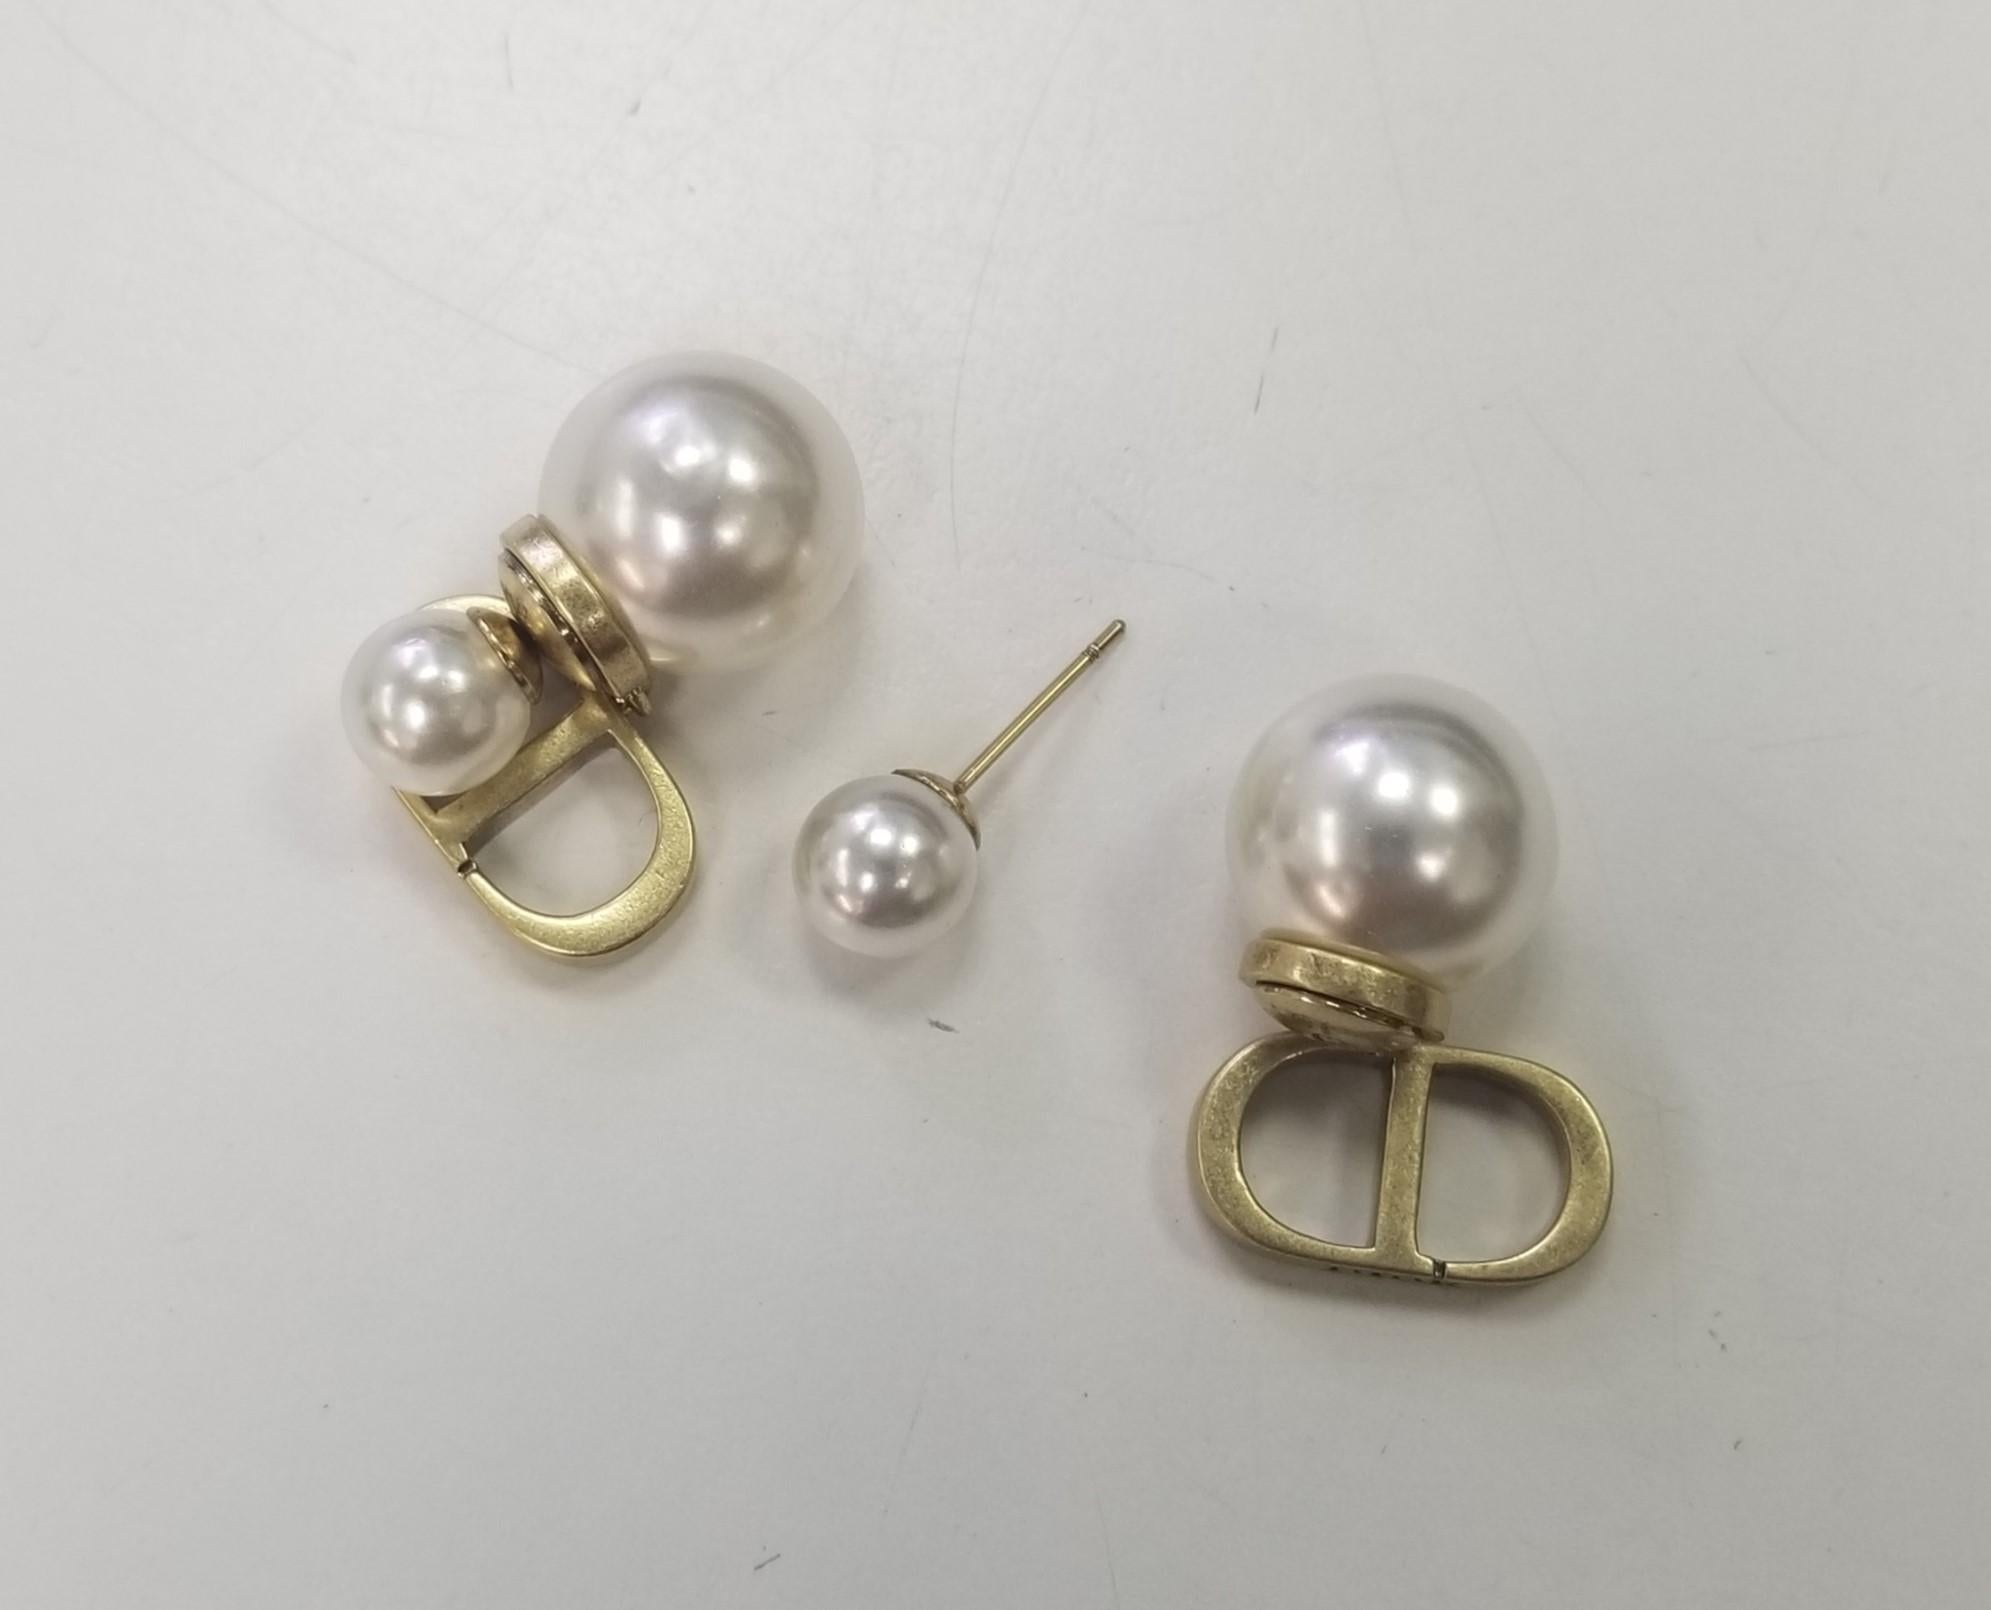 Christian Dior Mise En Dior Tribal Crystal  and faux pearl earrings.
